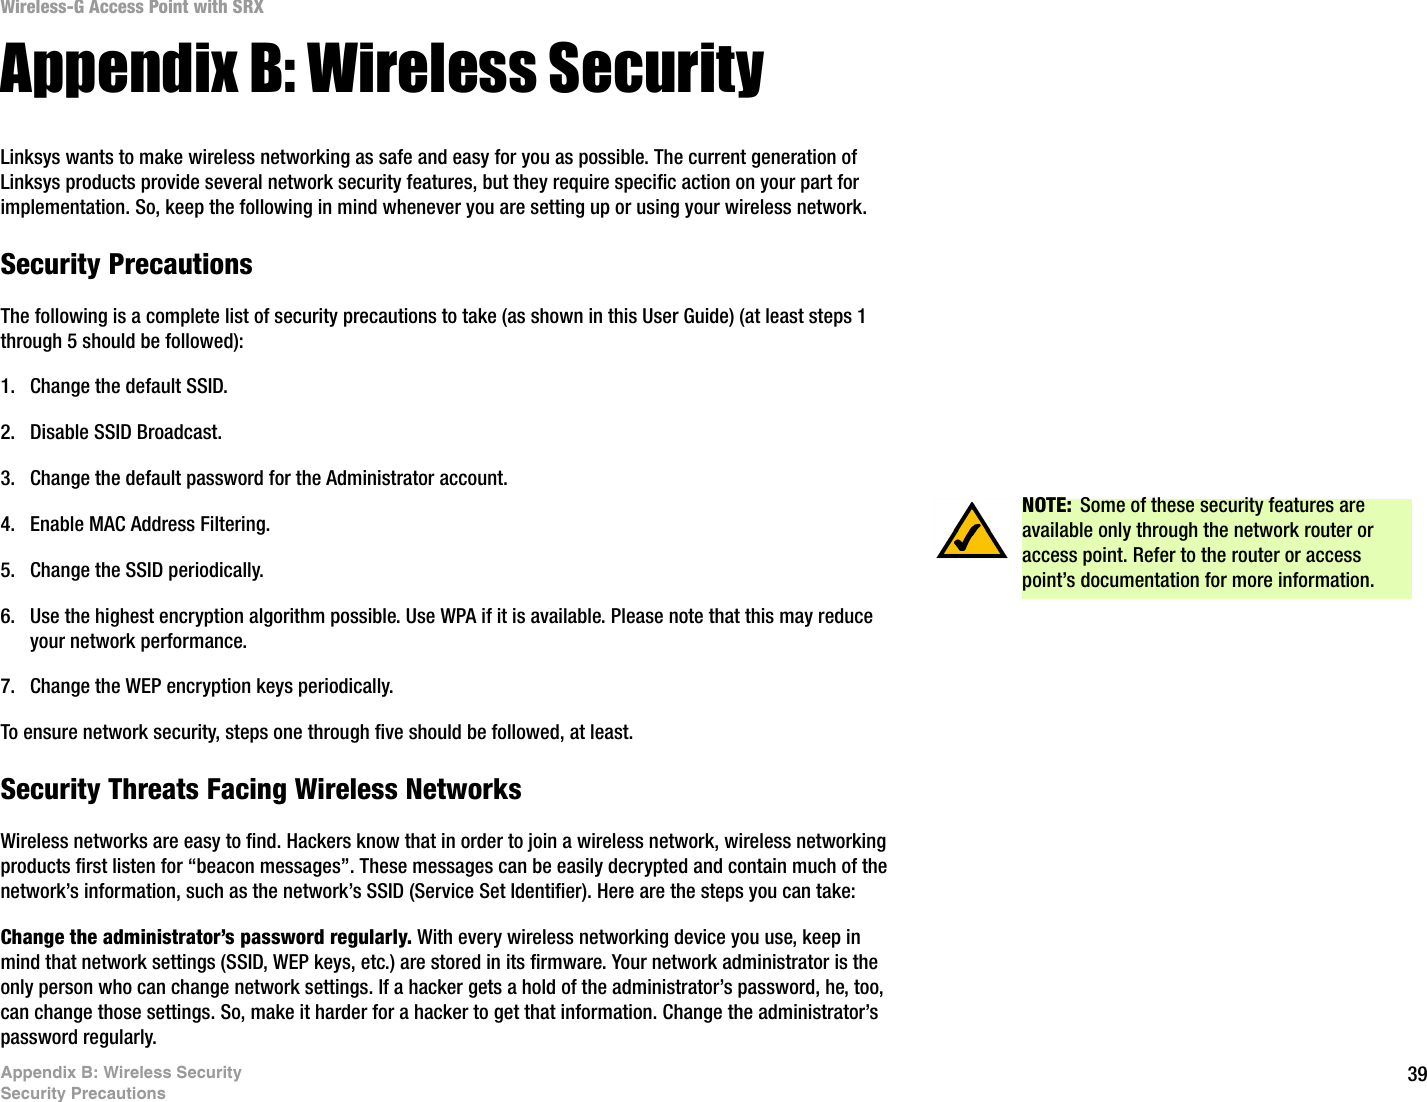 39Appendix B: Wireless SecuritySecurity PrecautionsWireless-G Access Point with SRXAppendix B: Wireless SecurityLinksys wants to make wireless networking as safe and easy for you as possible. The current generation of Linksys products provide several network security features, but they require specific action on your part for implementation. So, keep the following in mind whenever you are setting up or using your wireless network.Security PrecautionsThe following is a complete list of security precautions to take (as shown in this User Guide) (at least steps 1 through 5 should be followed):1. Change the default SSID. 2. Disable SSID Broadcast. 3. Change the default password for the Administrator account. 4. Enable MAC Address Filtering. 5. Change the SSID periodically. 6. Use the highest encryption algorithm possible. Use WPA if it is available. Please note that this may reduce your network performance. 7. Change the WEP encryption keys periodically. To ensure network security, steps one through five should be followed, at least.Security Threats Facing Wireless Networks Wireless networks are easy to find. Hackers know that in order to join a wireless network, wireless networking products first listen for “beacon messages”. These messages can be easily decrypted and contain much of the network’s information, such as the network’s SSID (Service Set Identifier). Here are the steps you can take:Change the administrator’s password regularly. With every wireless networking device you use, keep in mind that network settings (SSID, WEP keys, etc.) are stored in its firmware. Your network administrator is the only person who can change network settings. If a hacker gets a hold of the administrator’s password, he, too, can change those settings. So, make it harder for a hacker to get that information. Change the administrator’s password regularly.NOTE: Some of these security features are available only through the network router or access point. Refer to the router or access point’s documentation for more information.